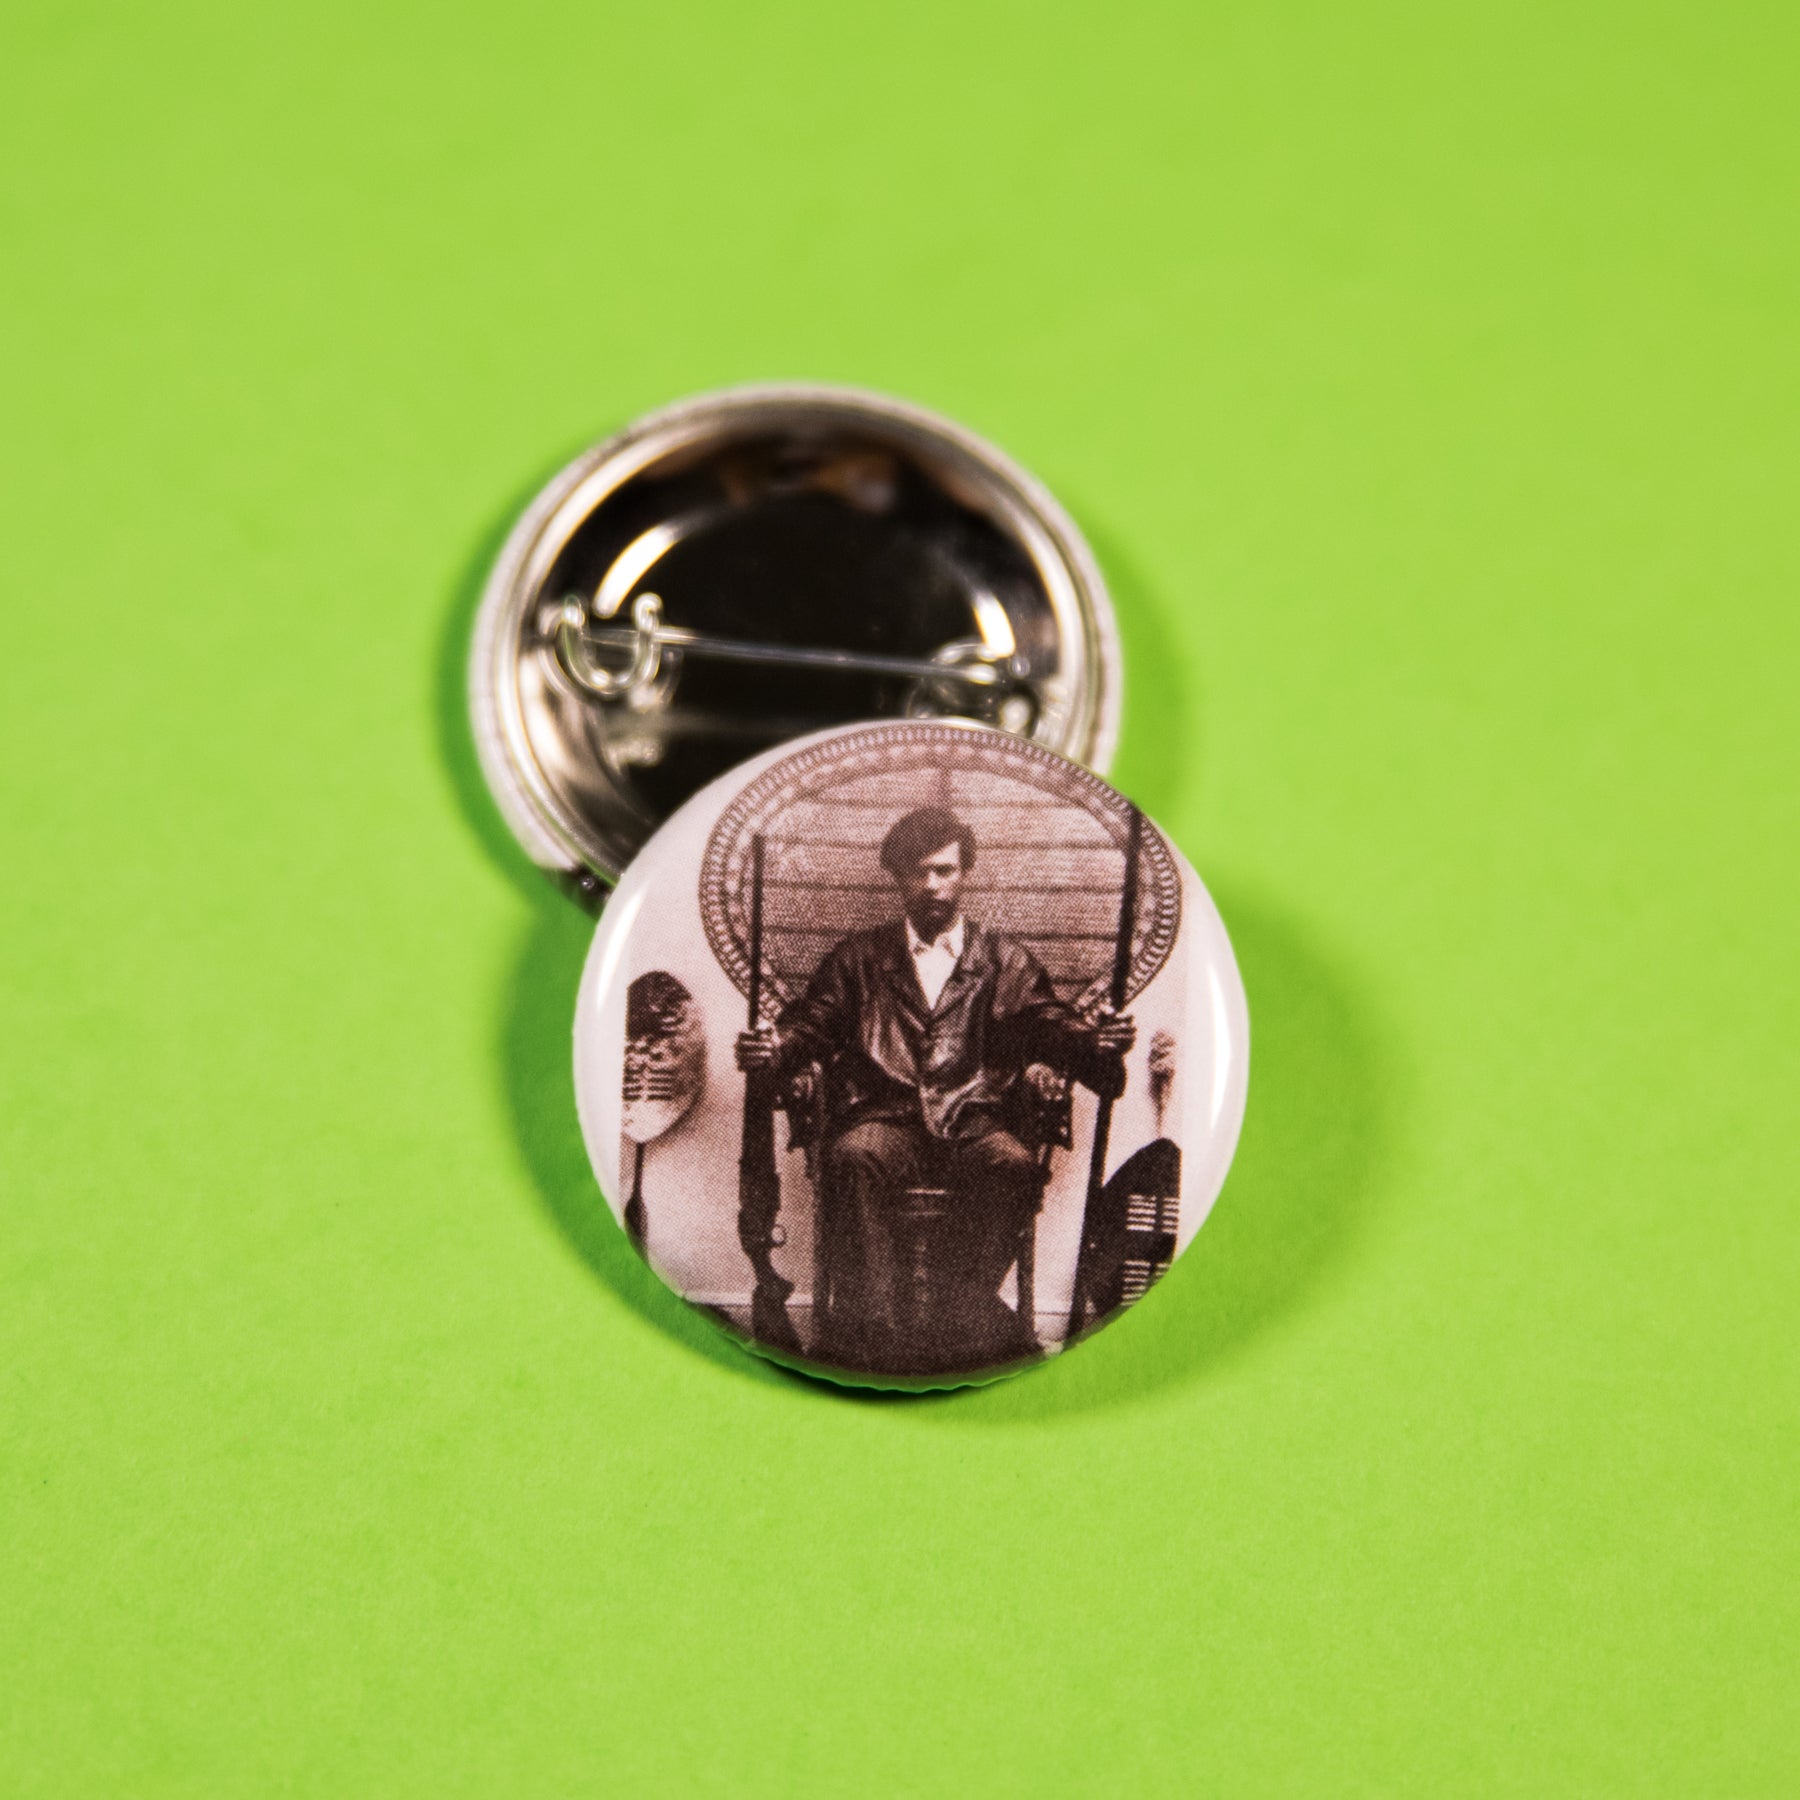 Black Panther Members Button